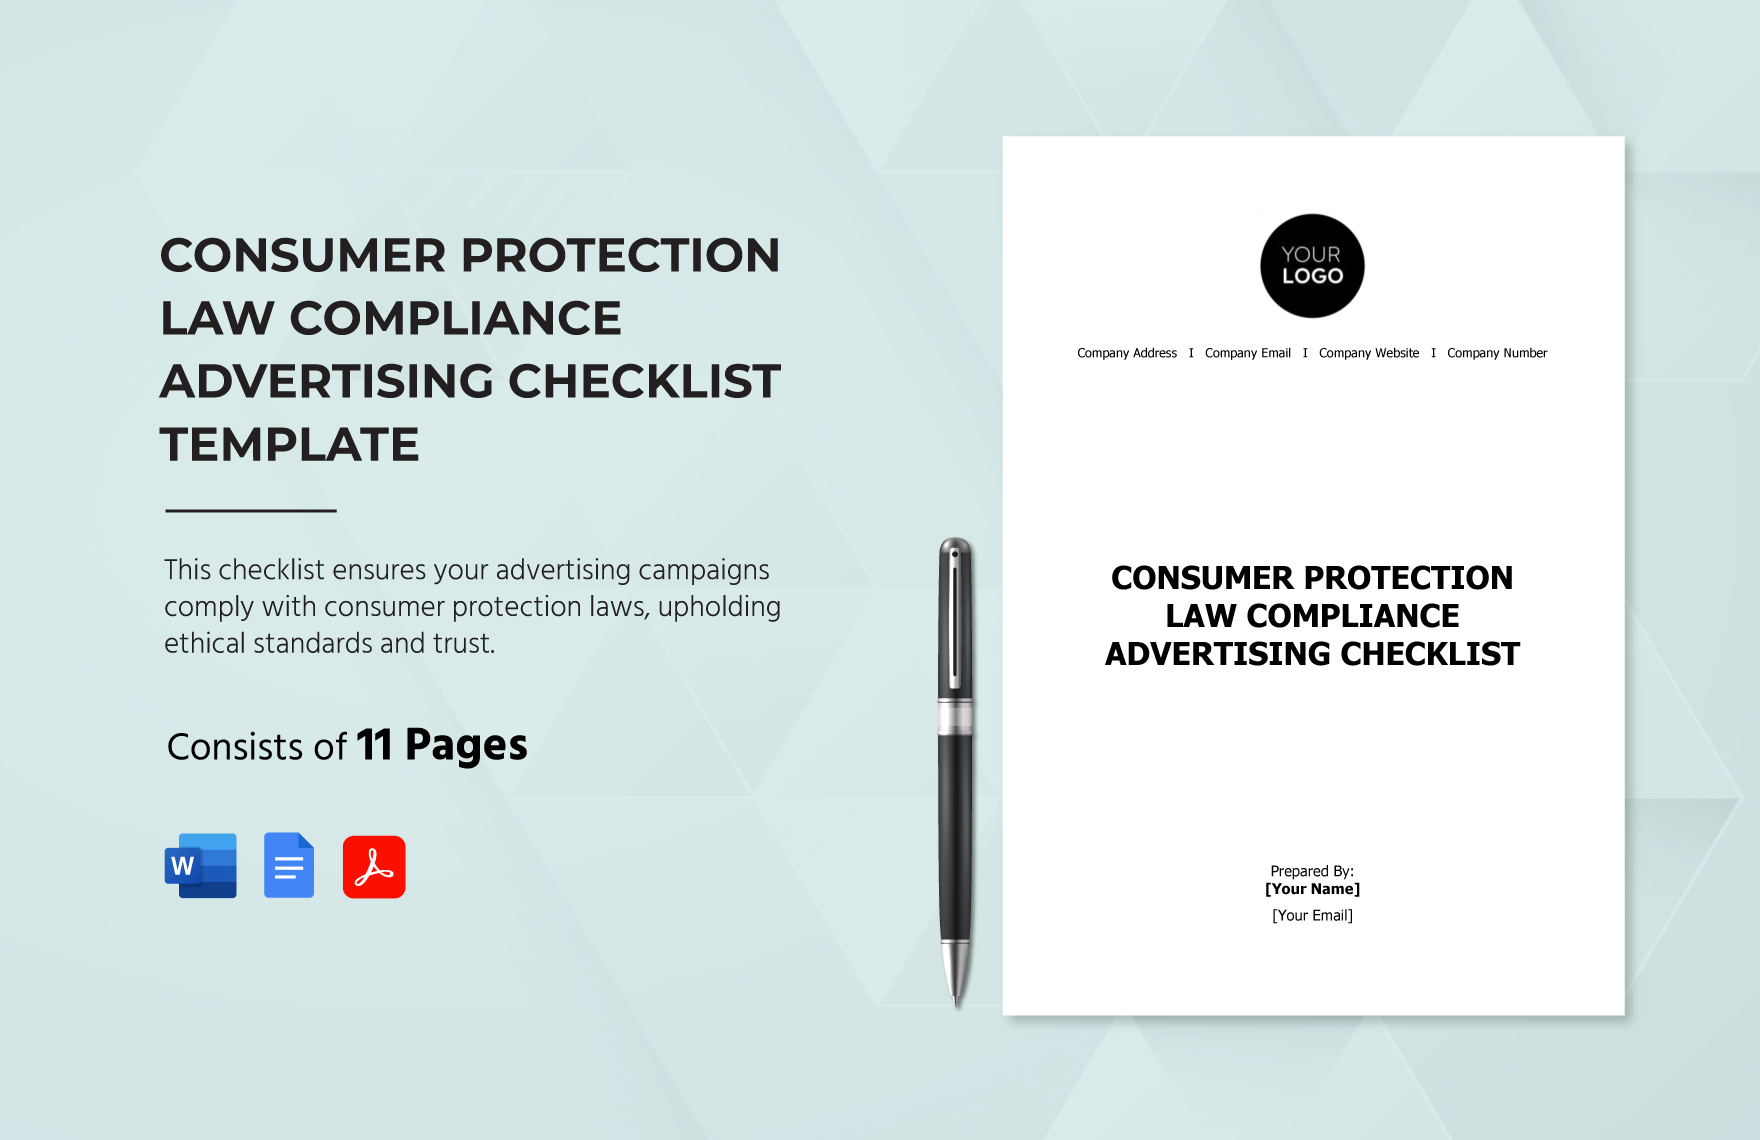 Consumer Protection Law Compliance Advertising Checklist Template in Word, Google Docs, PDF